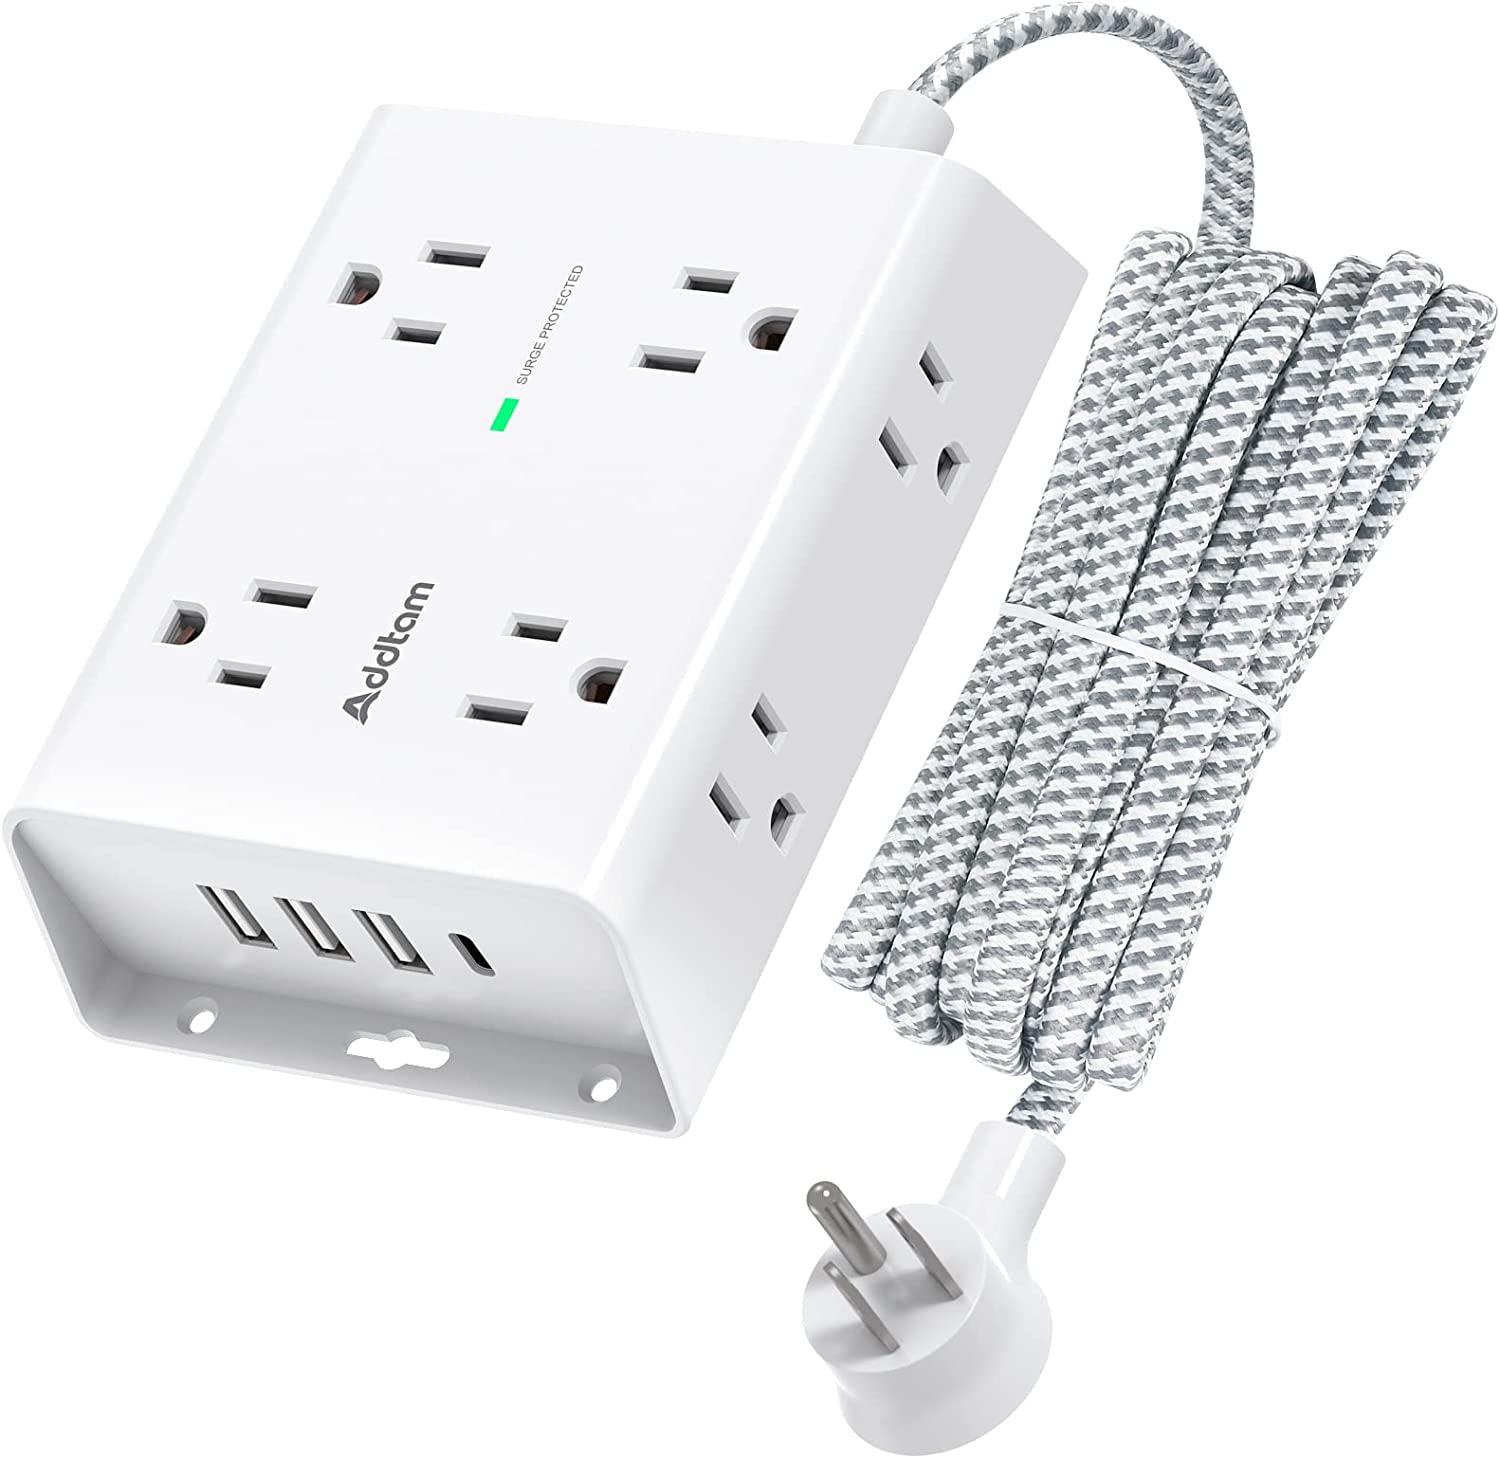 Surge Protector Power Strip with 8 outlets and 4 USB Ports for $15.49